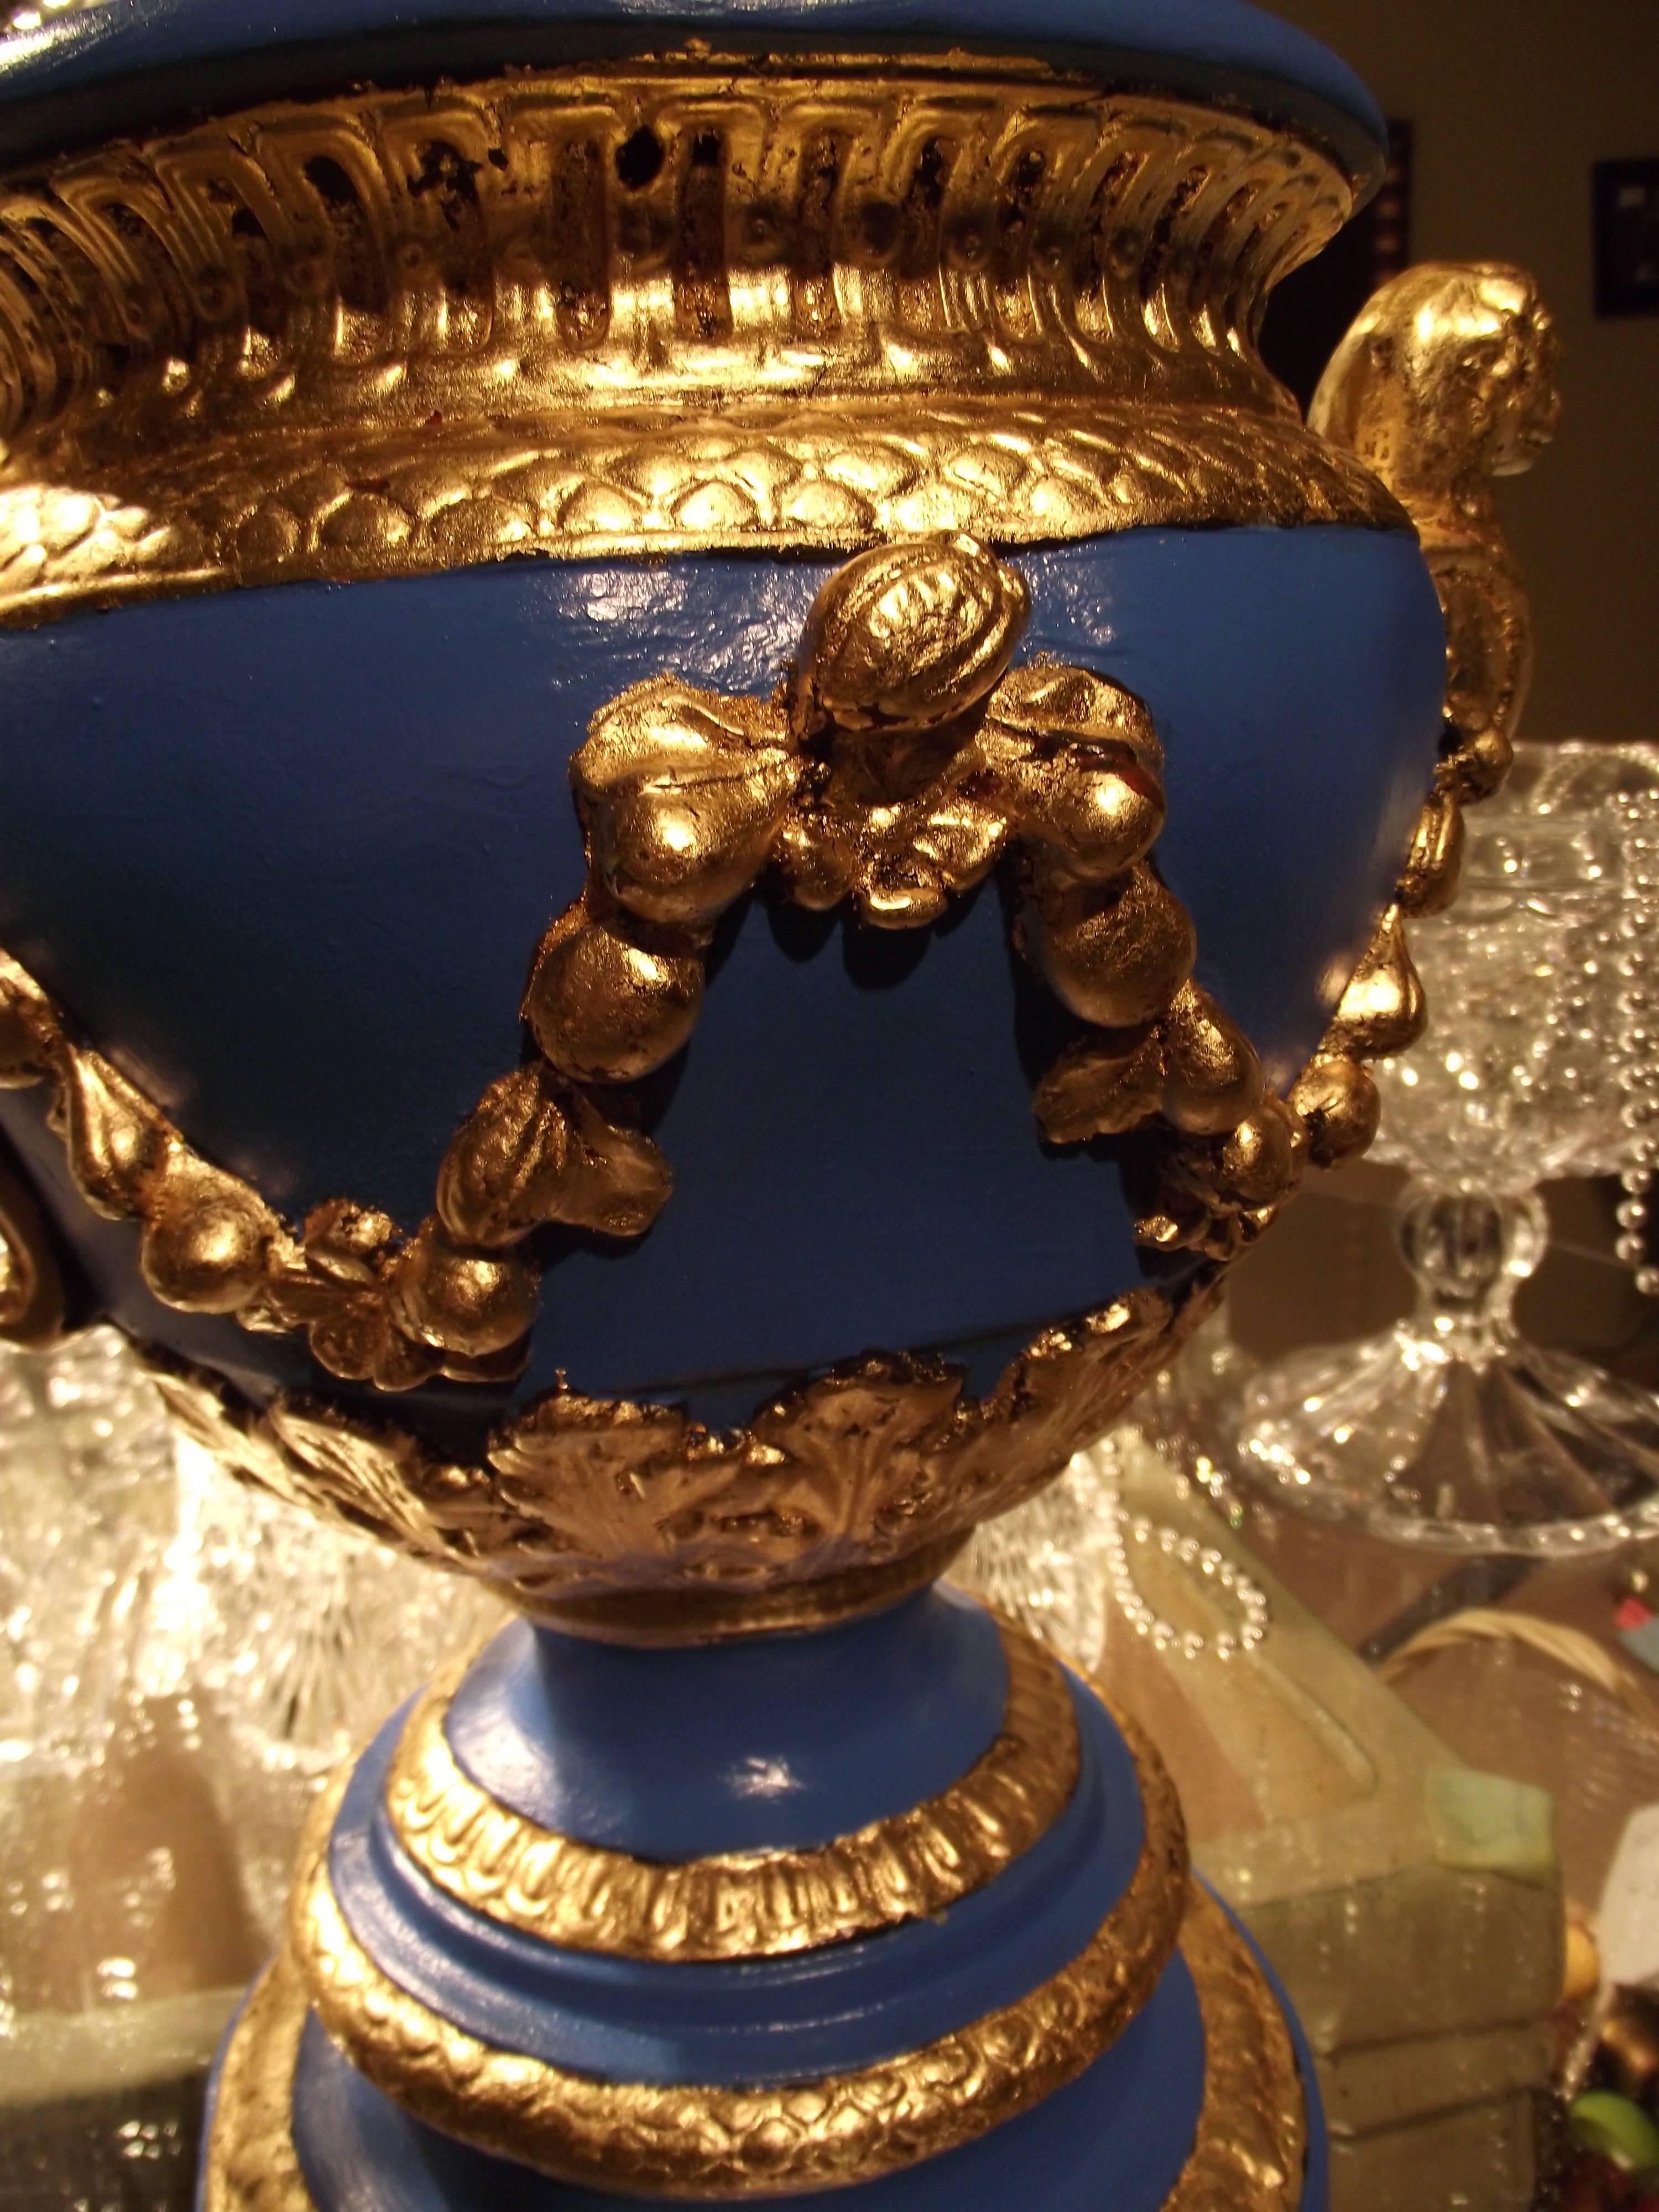 This striking reproduction plaster urn has an original hand applied finish produced in my studio. The gold leaf foil was hand applied.
The handles are ornamented with a lion head.
It stands 15" tall is 12 1/2" wide and 10"